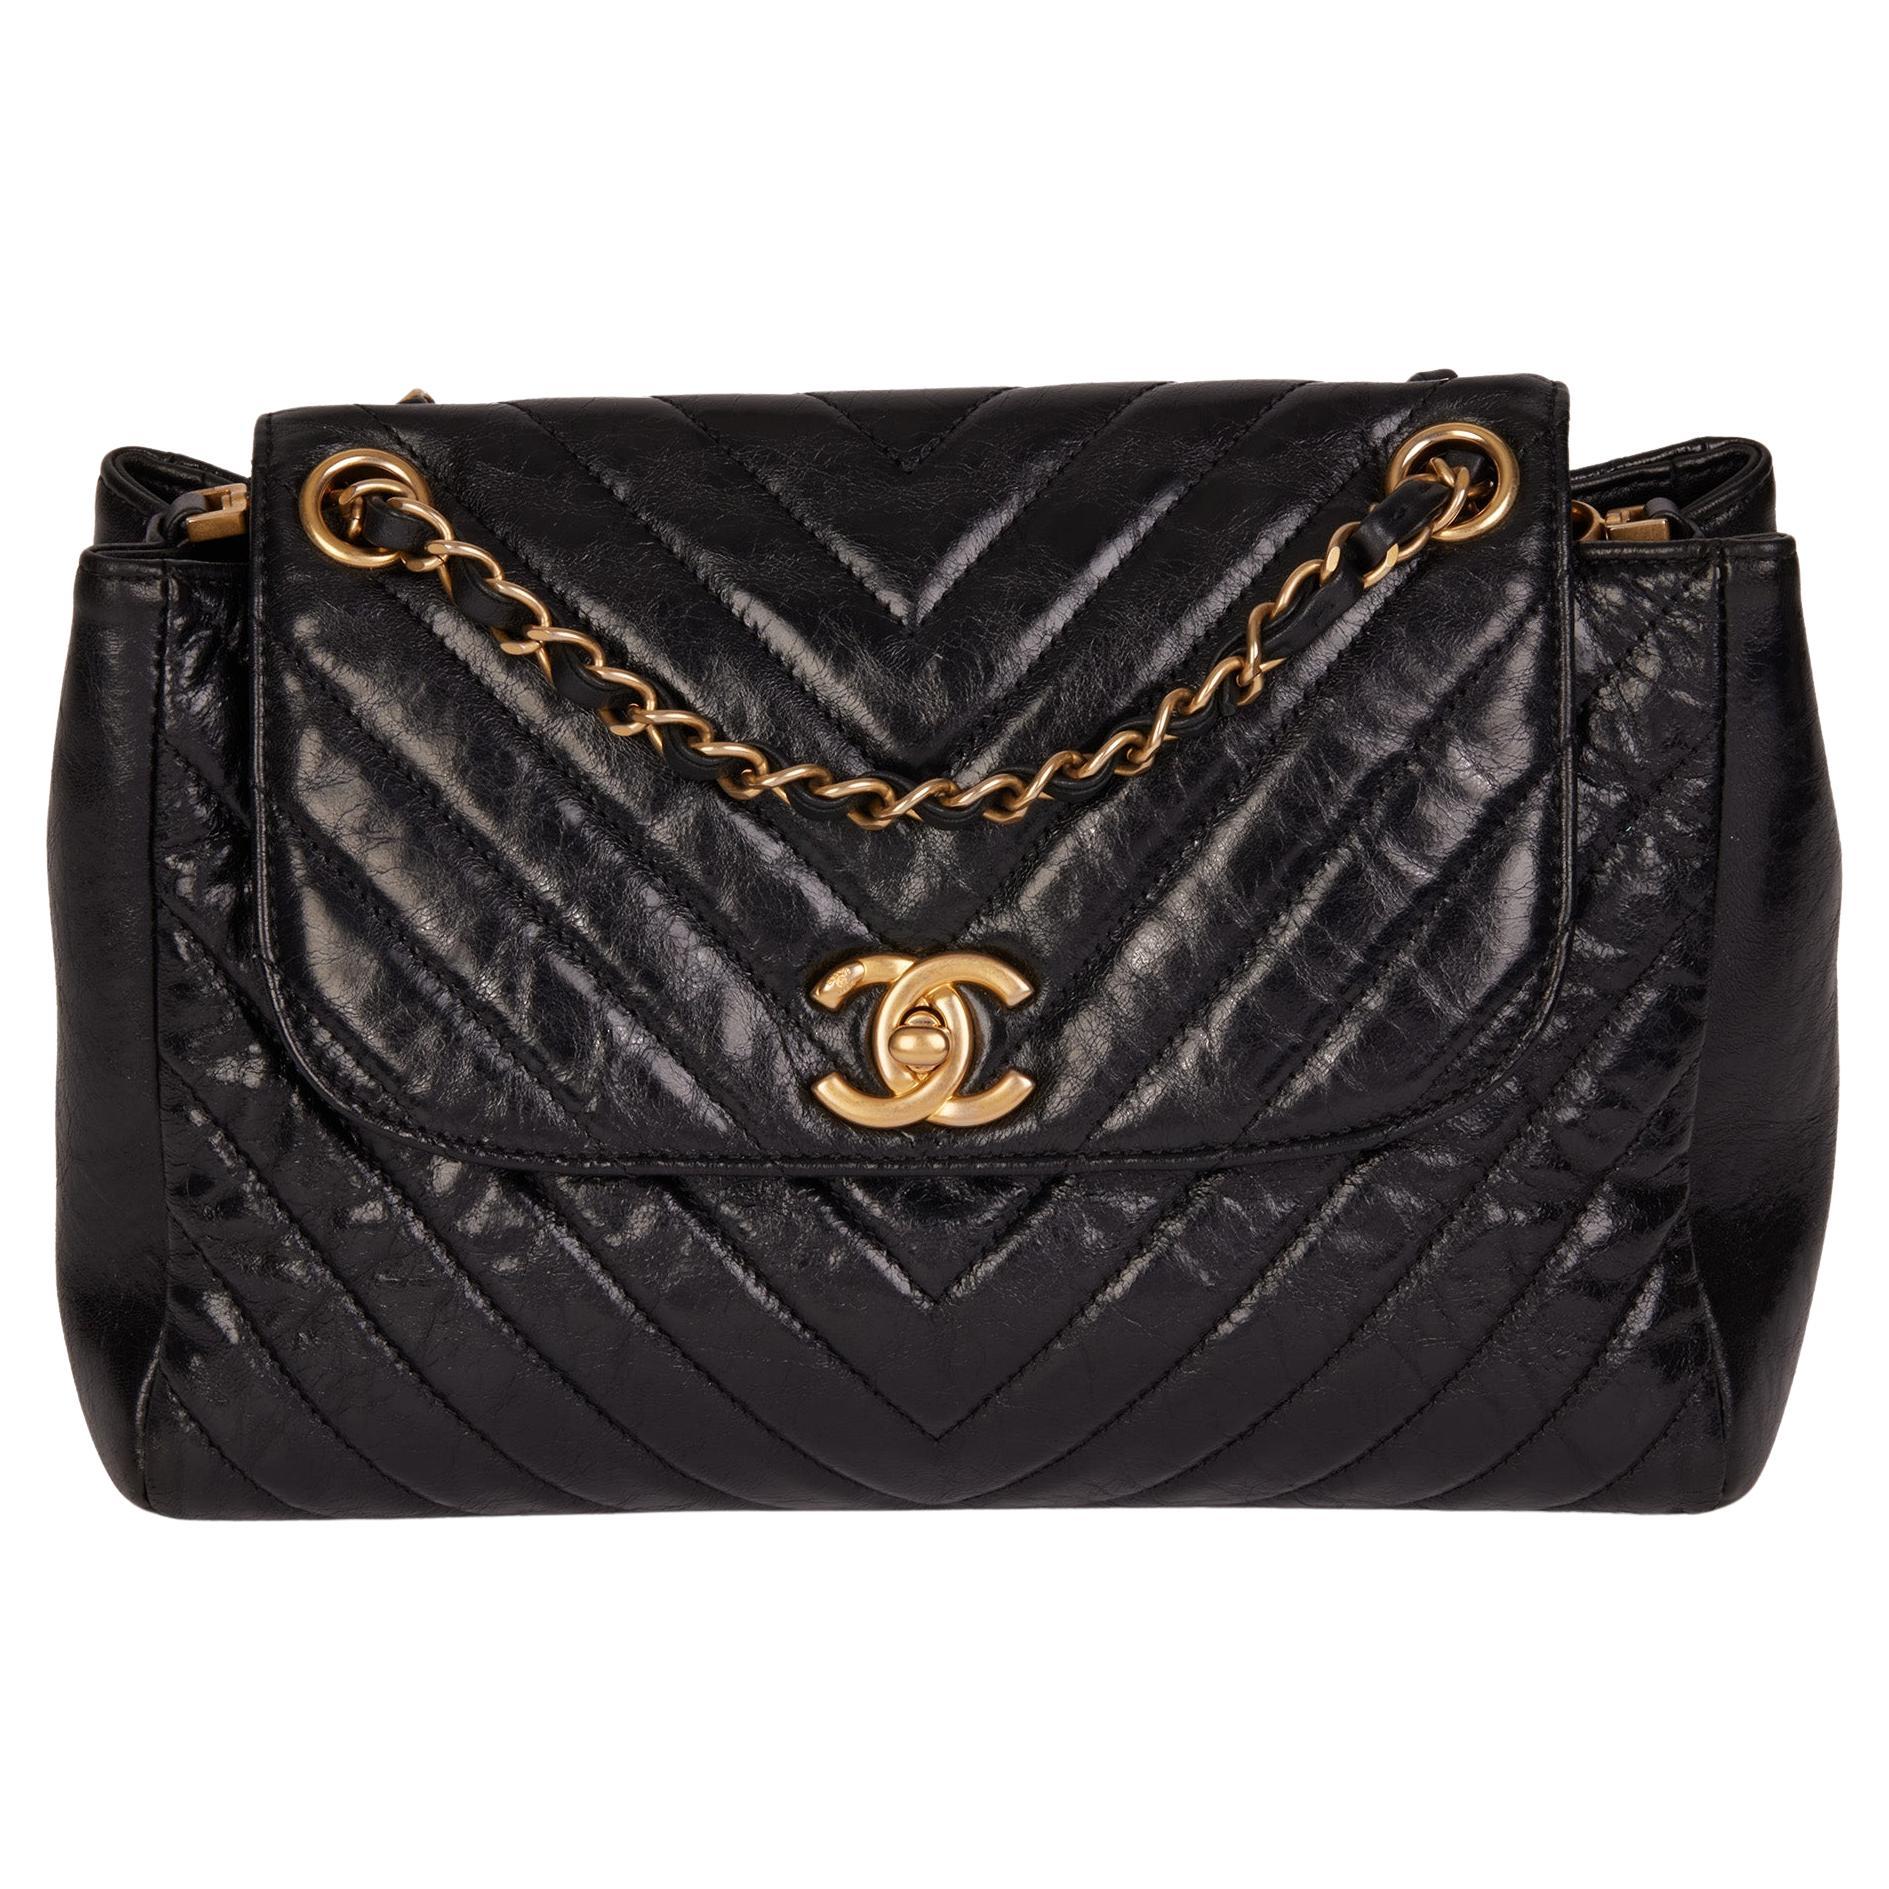 CHANEL Black Chevron Quilted Crumpled Calfskin Leather Classic Single Flap Bag